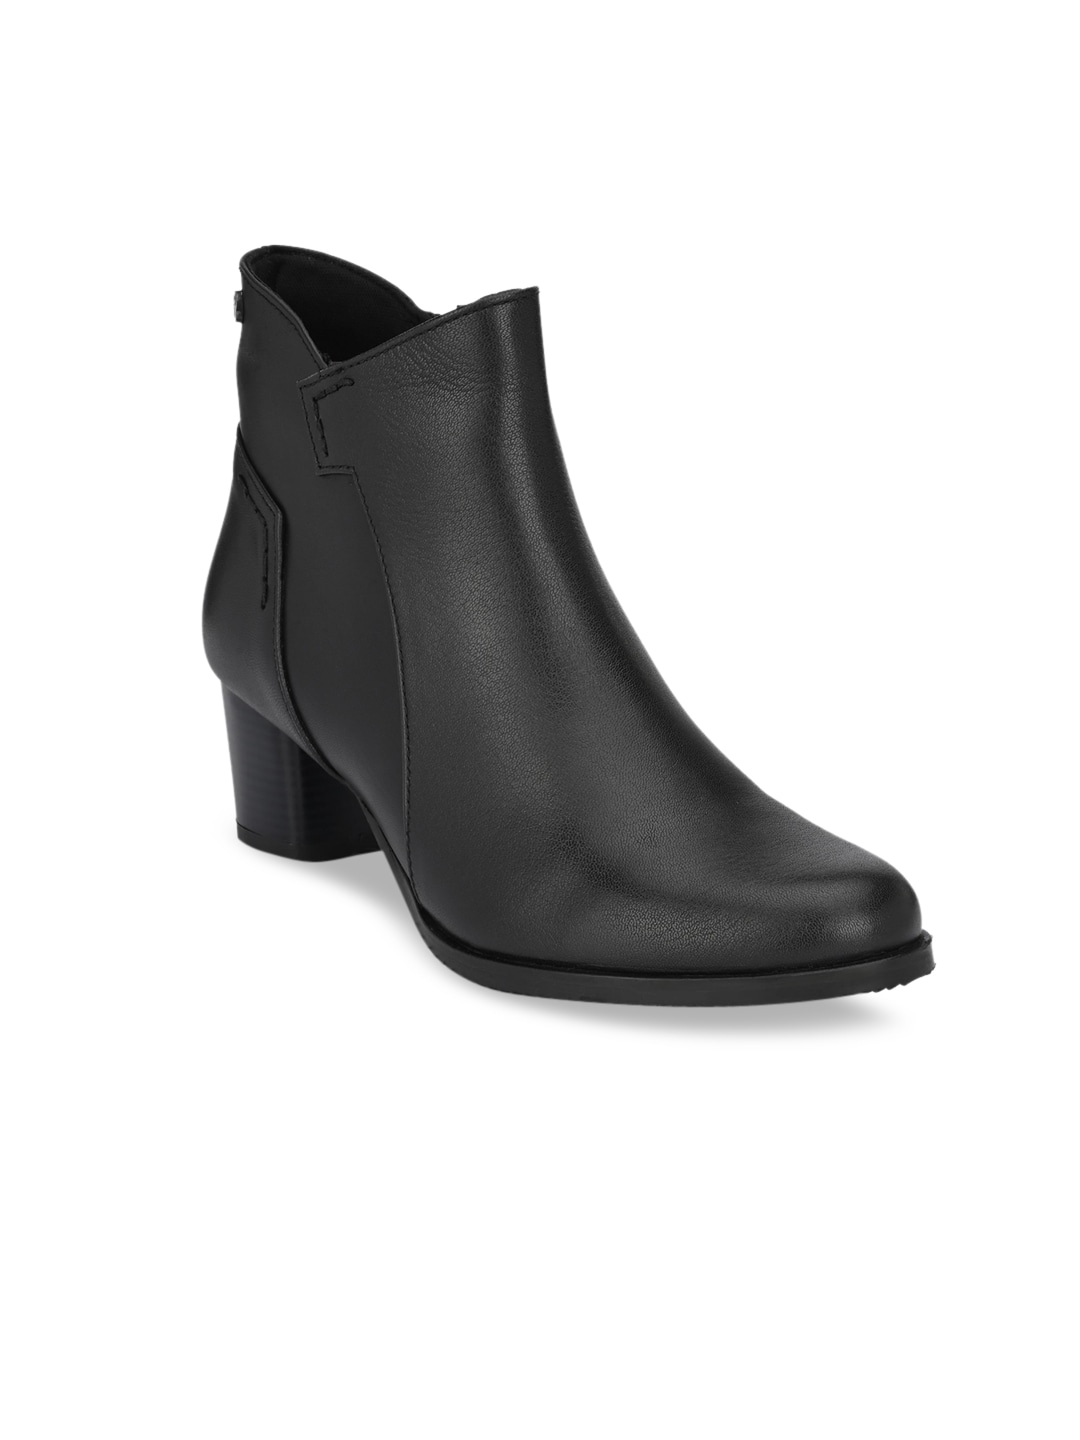 Delize Black Block Heeled Boots Price in India